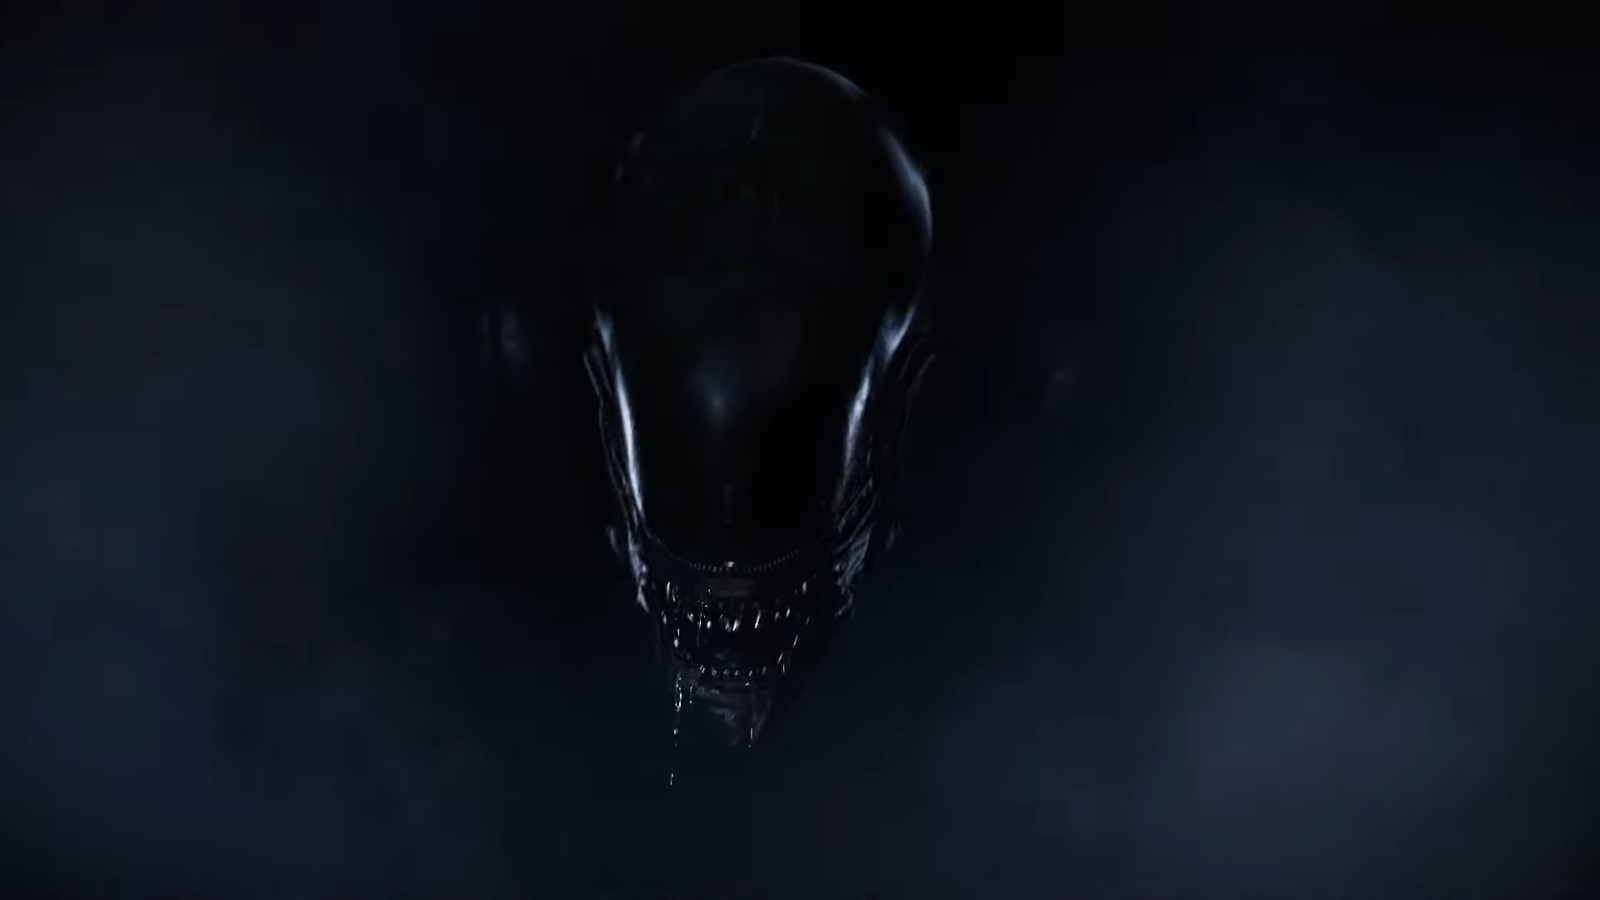 Dead by Daylight Developer Teases Crossover with Alien Franchise